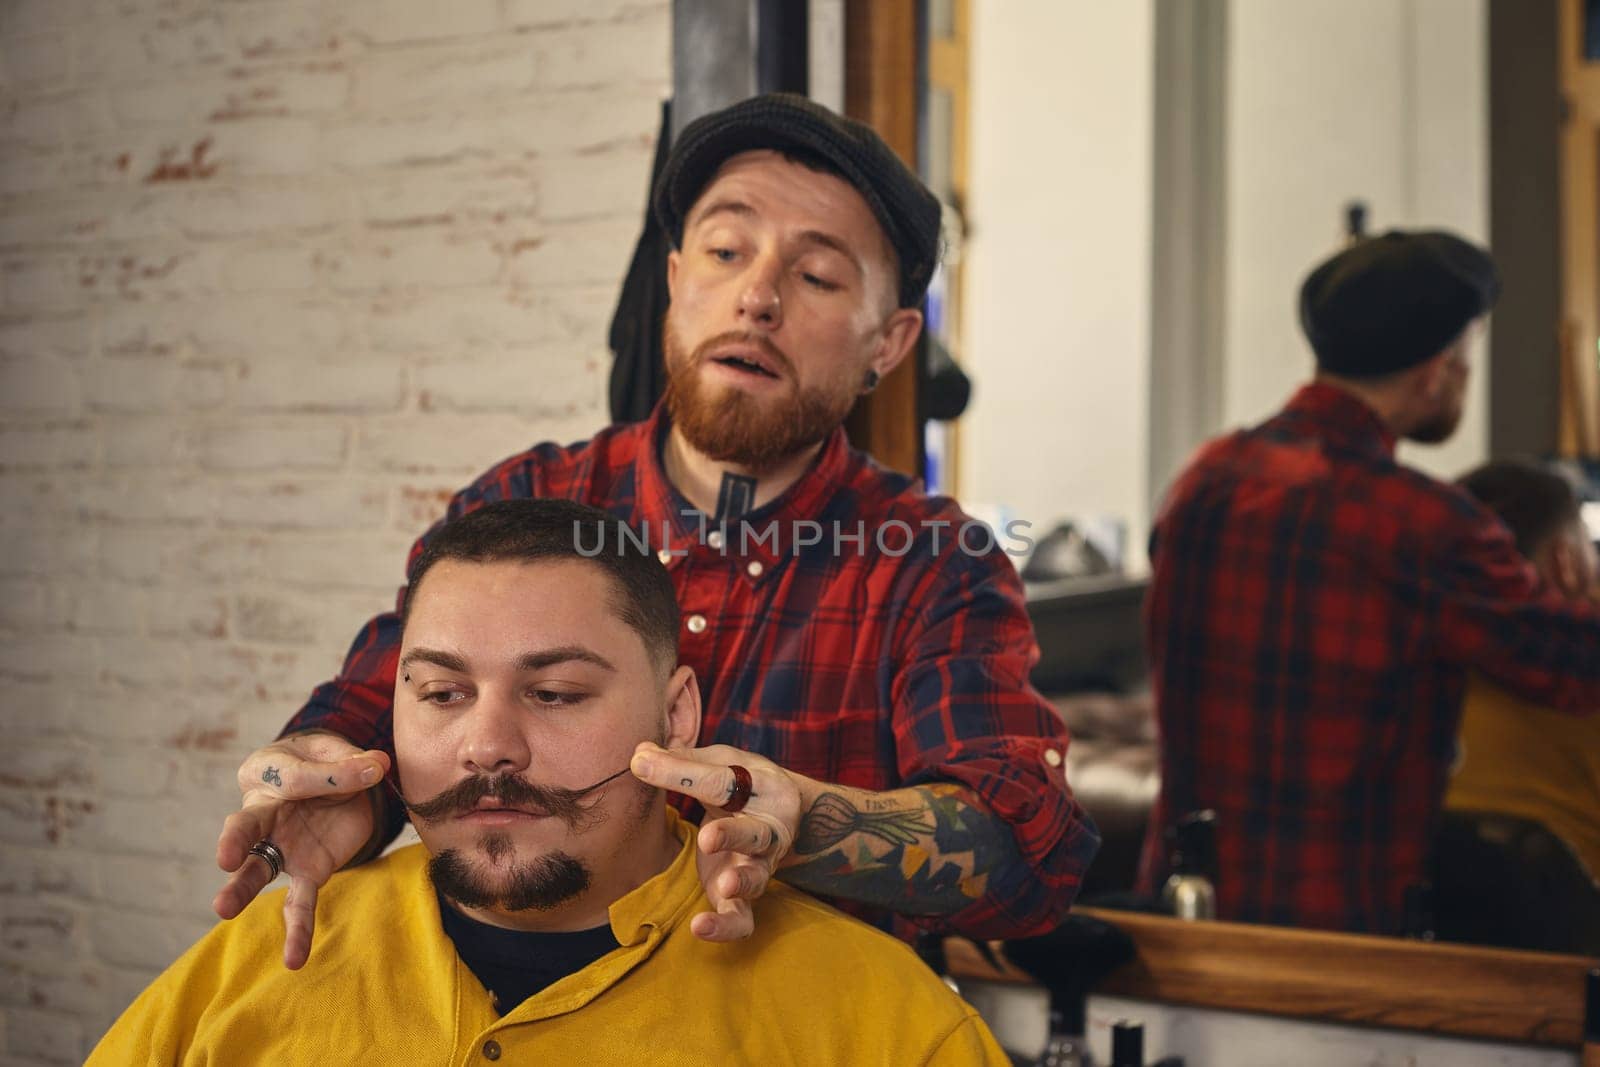 Client with beard and moustache sit on chair, and professional barber make beard shaving in barber shop. The barber straightens the mustache of the client